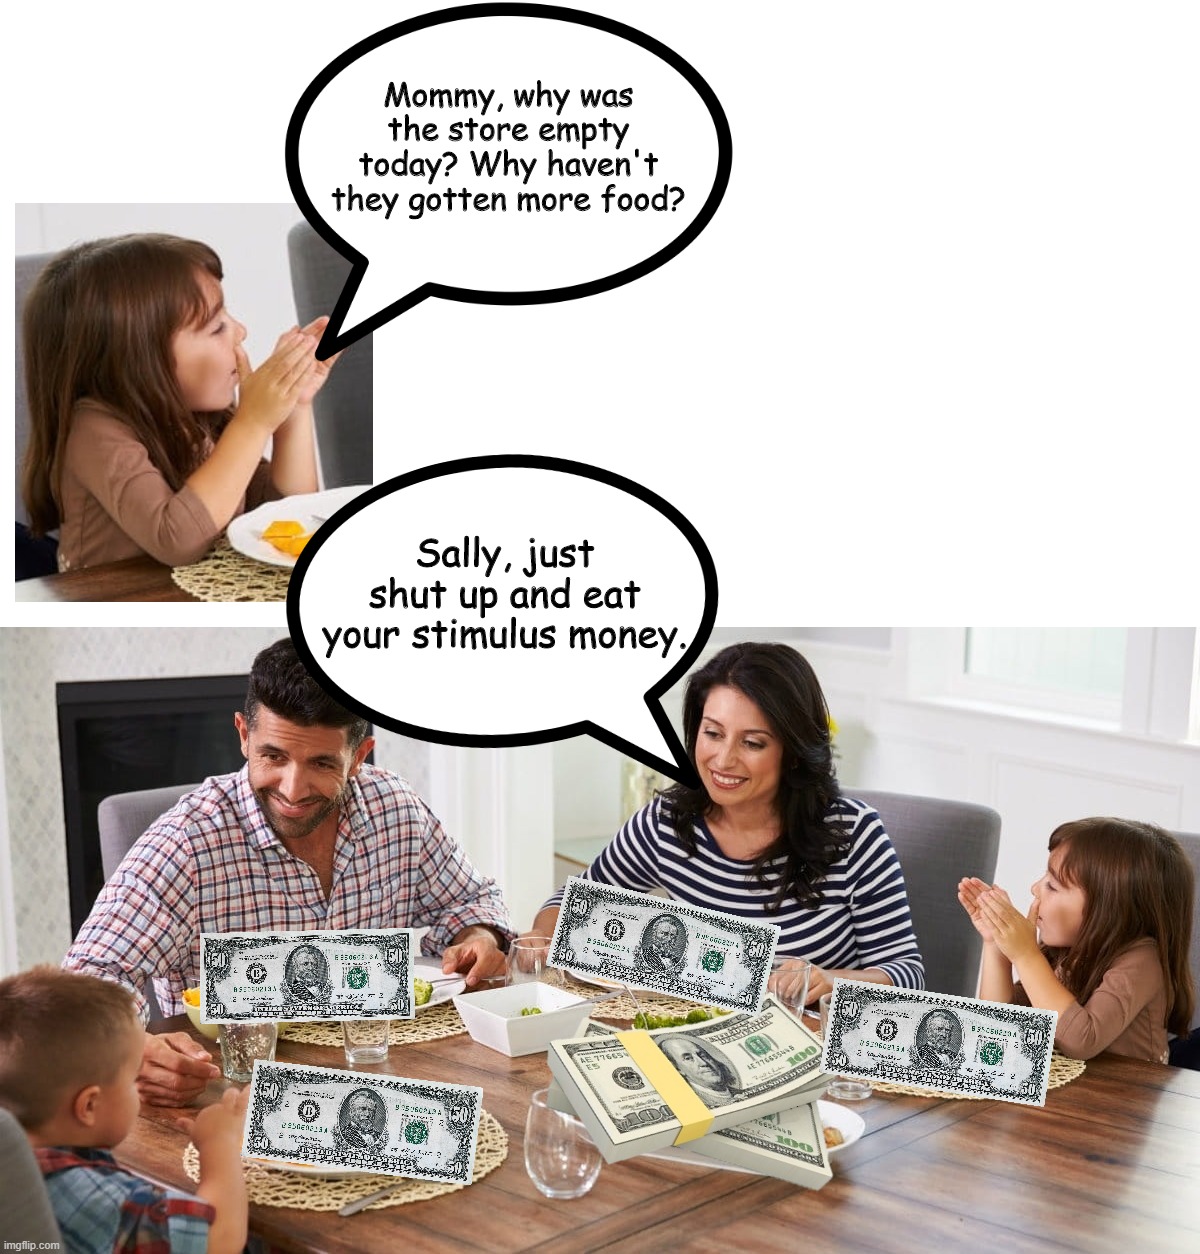 Family Dinner Conversation | Mommy, why was the store empty today? Why haven't they gotten more food? Sally, just shut up and eat your stimulus money. | image tagged in family dinner conversation | made w/ Imgflip meme maker